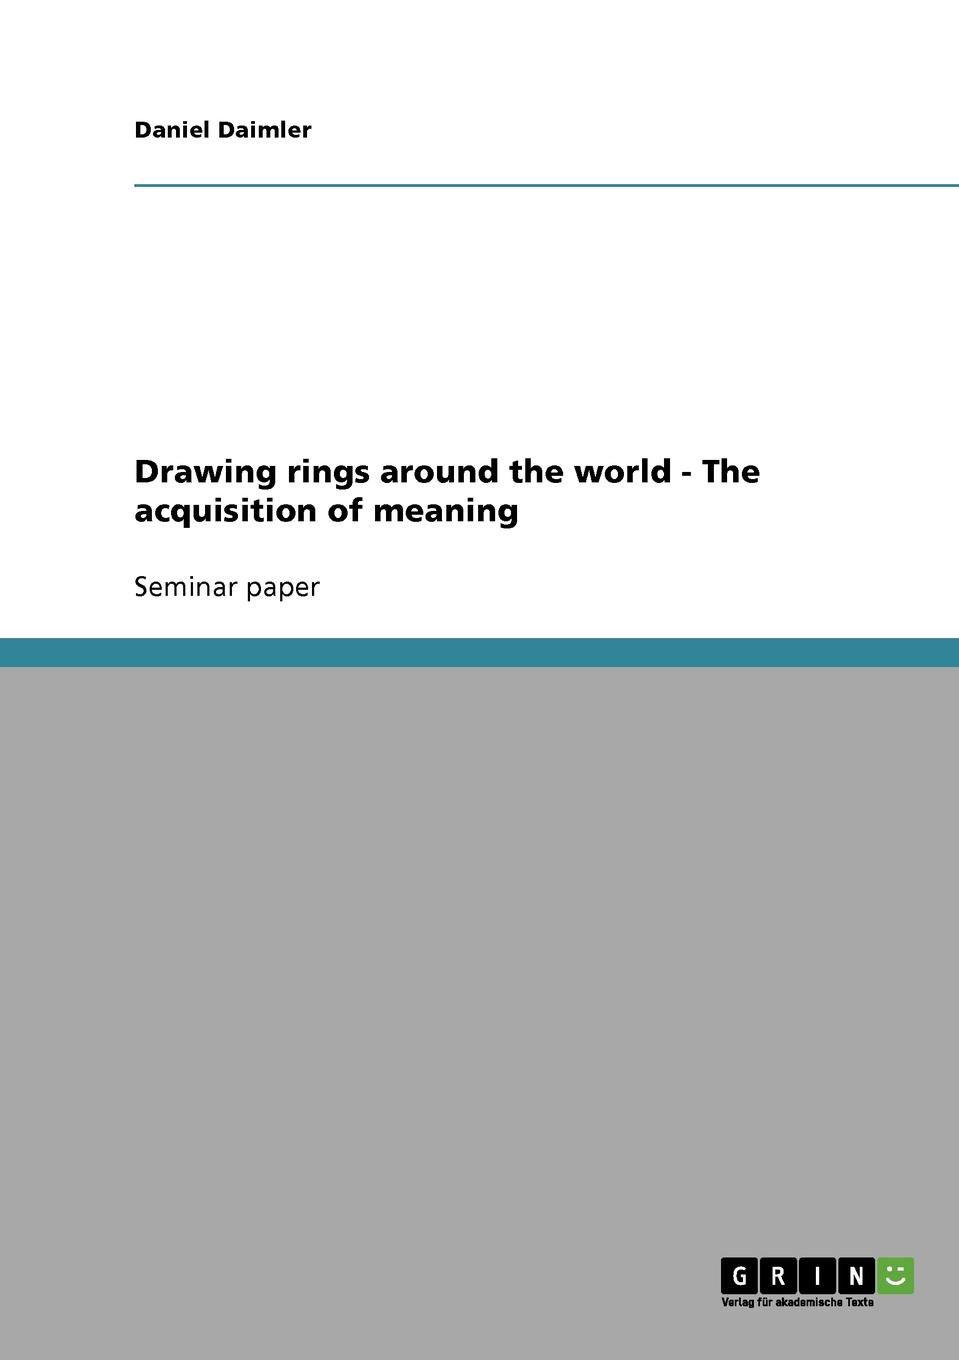 Drawing rings around the world - The acquisition of meaning